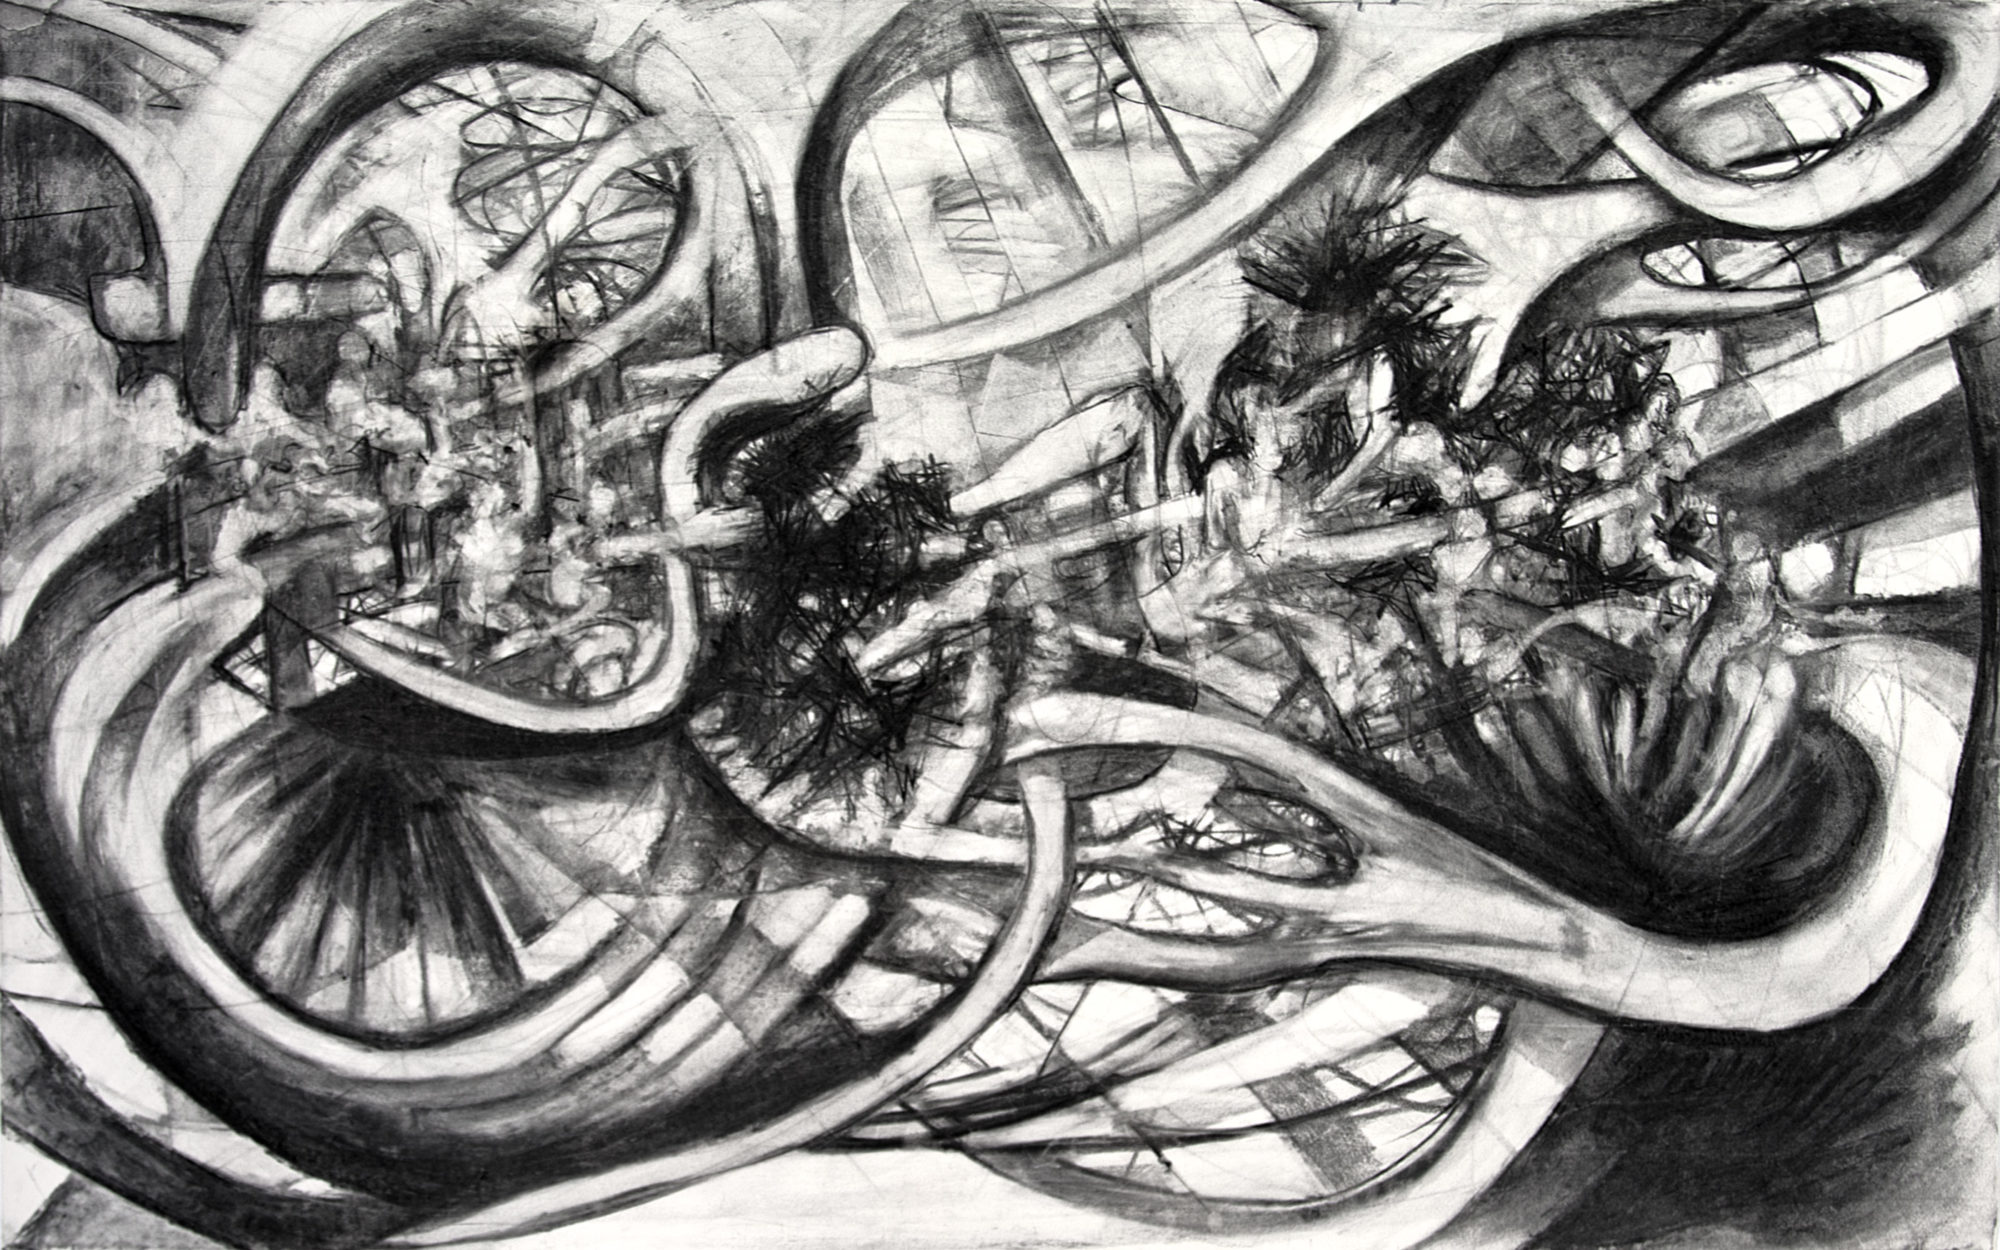 David le Viseur, "The Night Schlingensief Died", Charcoal on Paper, 160x100cm, 2010